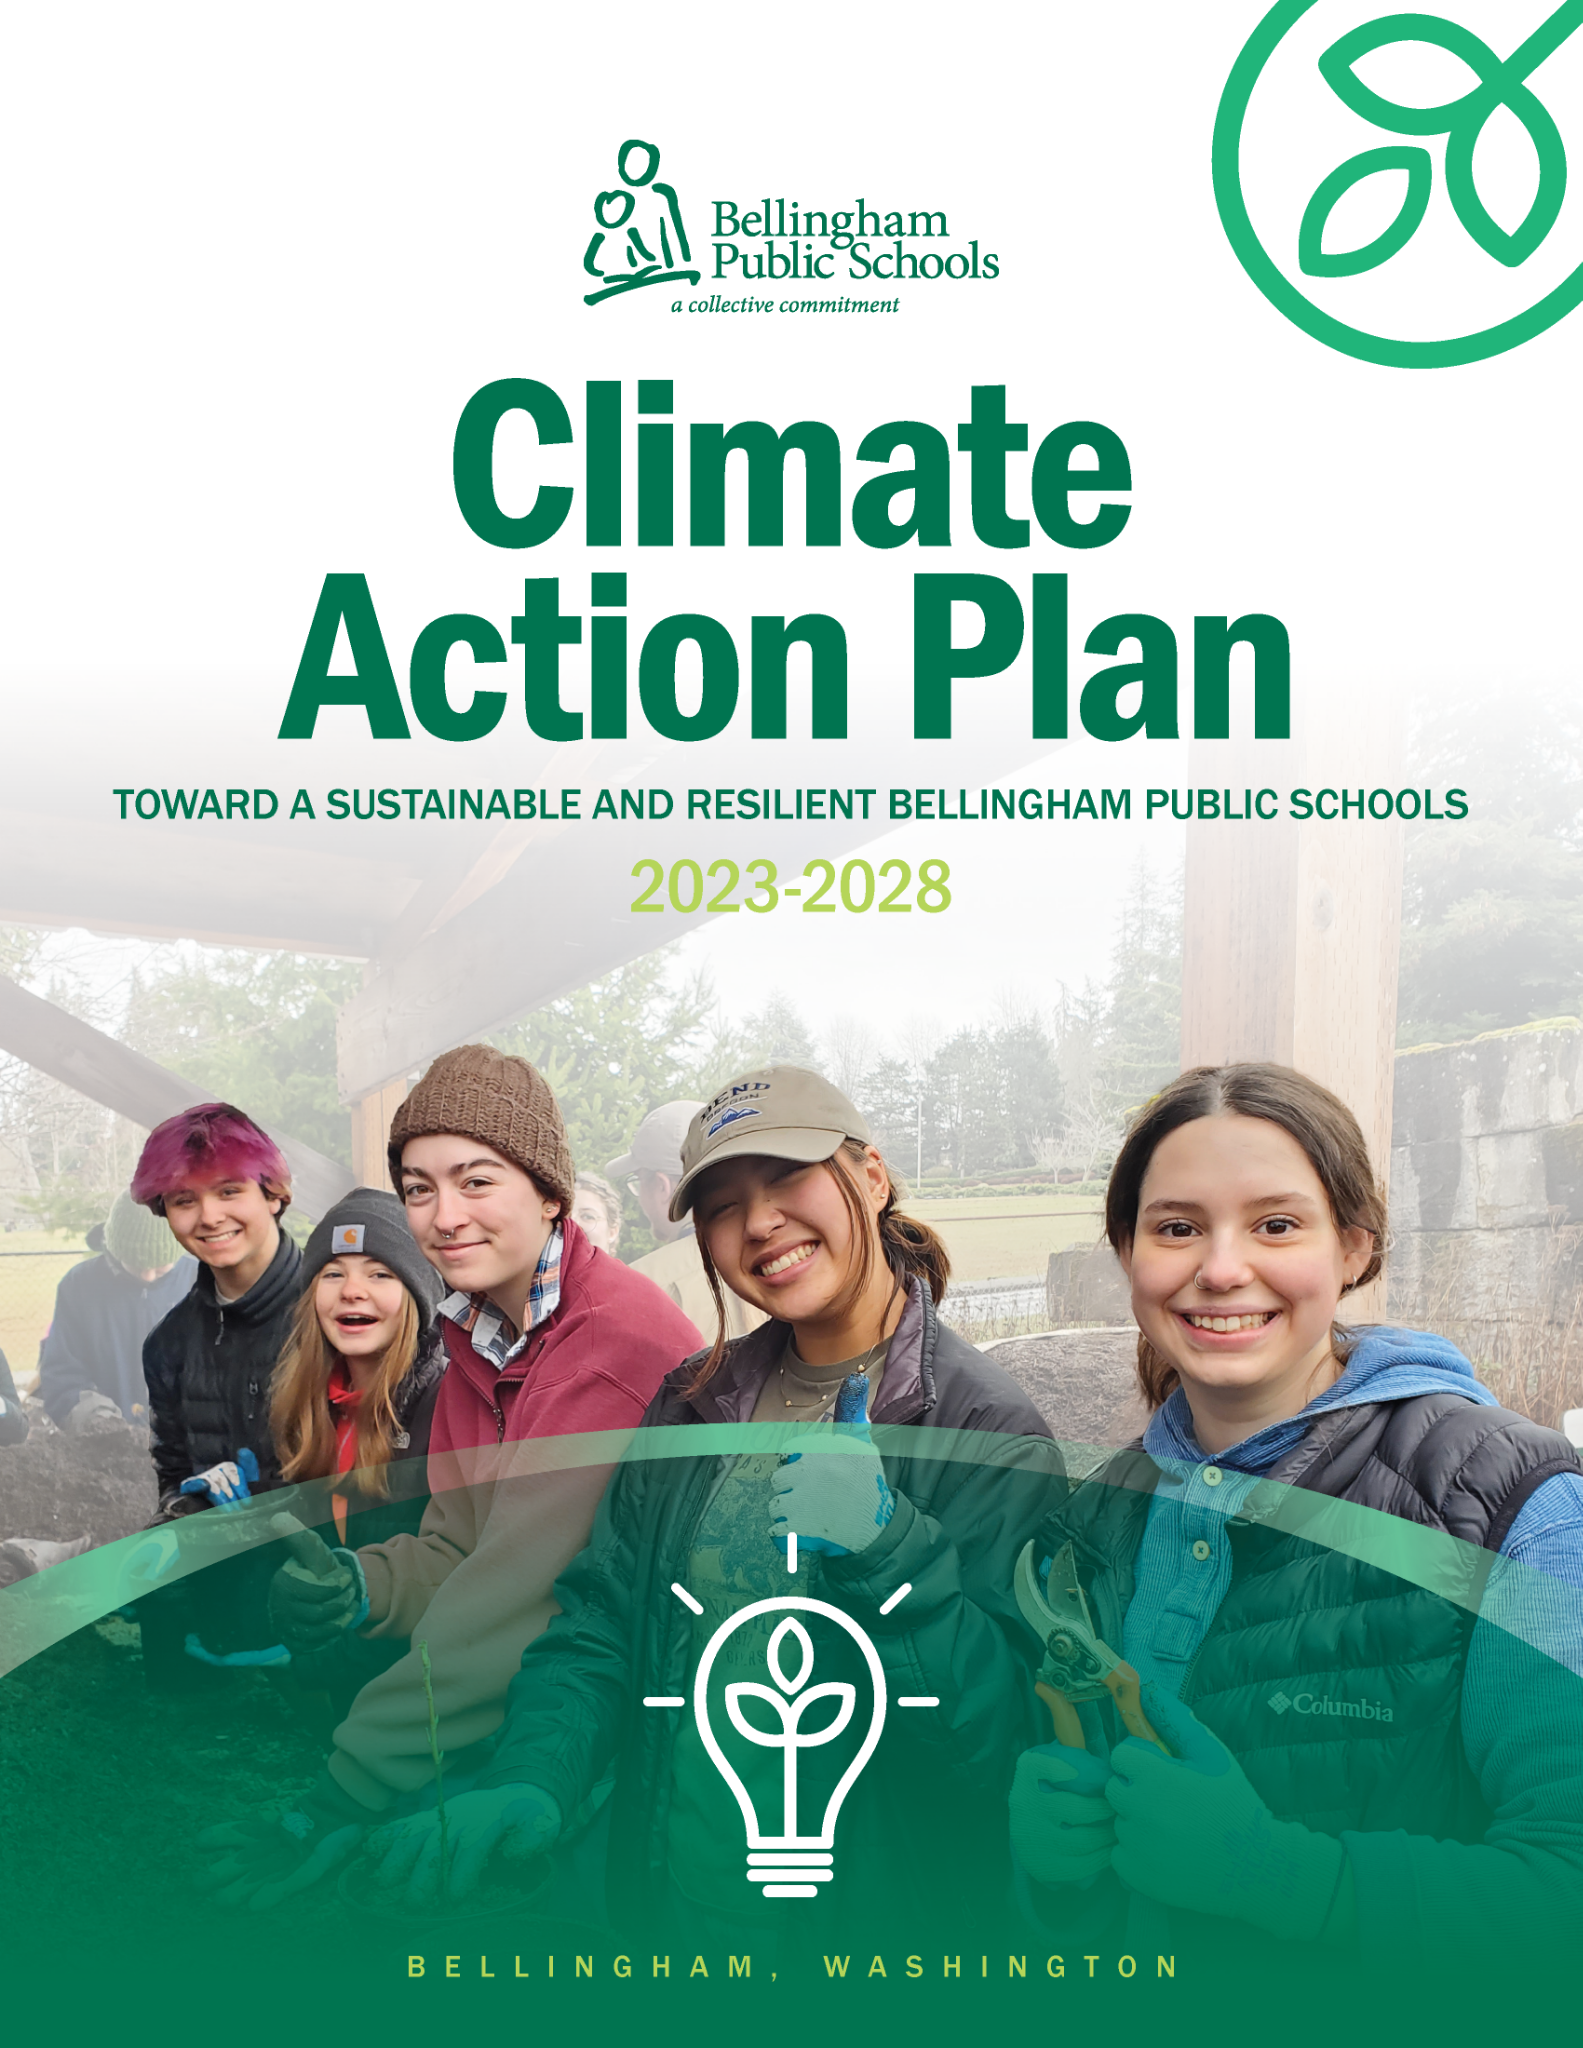 Front cover of Bellingham's climate action plan with schoolchildren